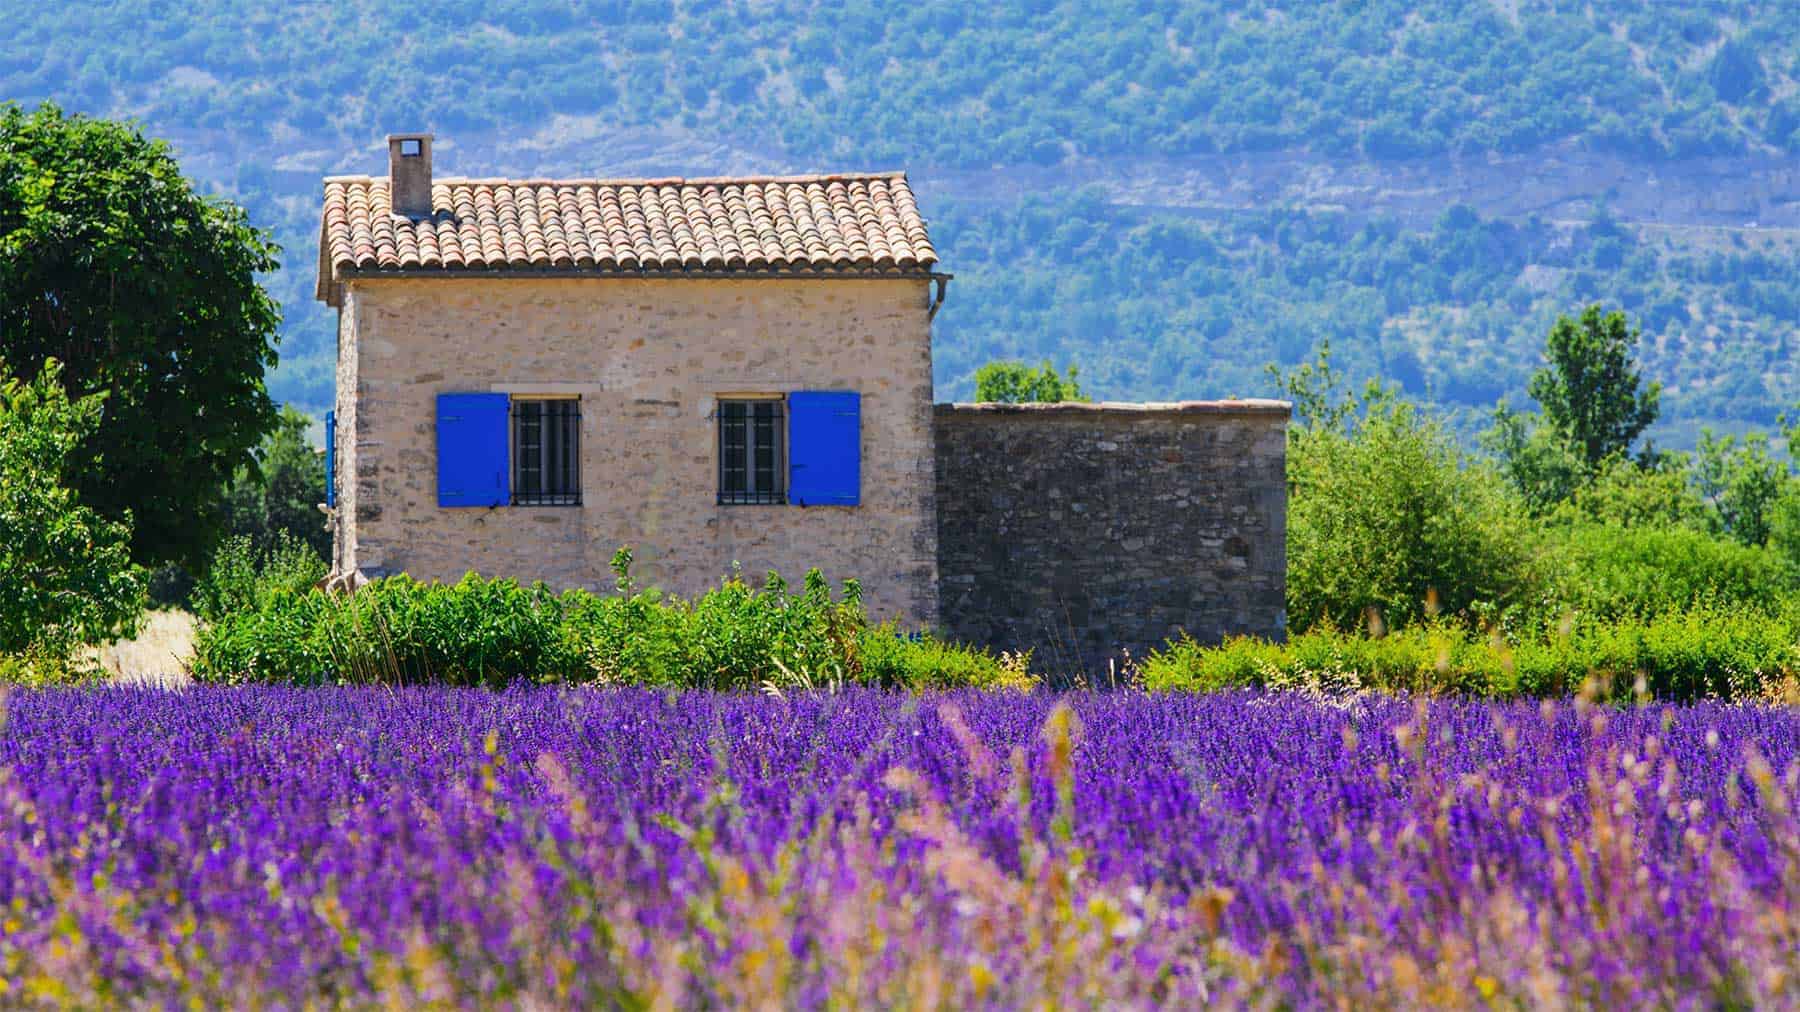 House in Provence - France